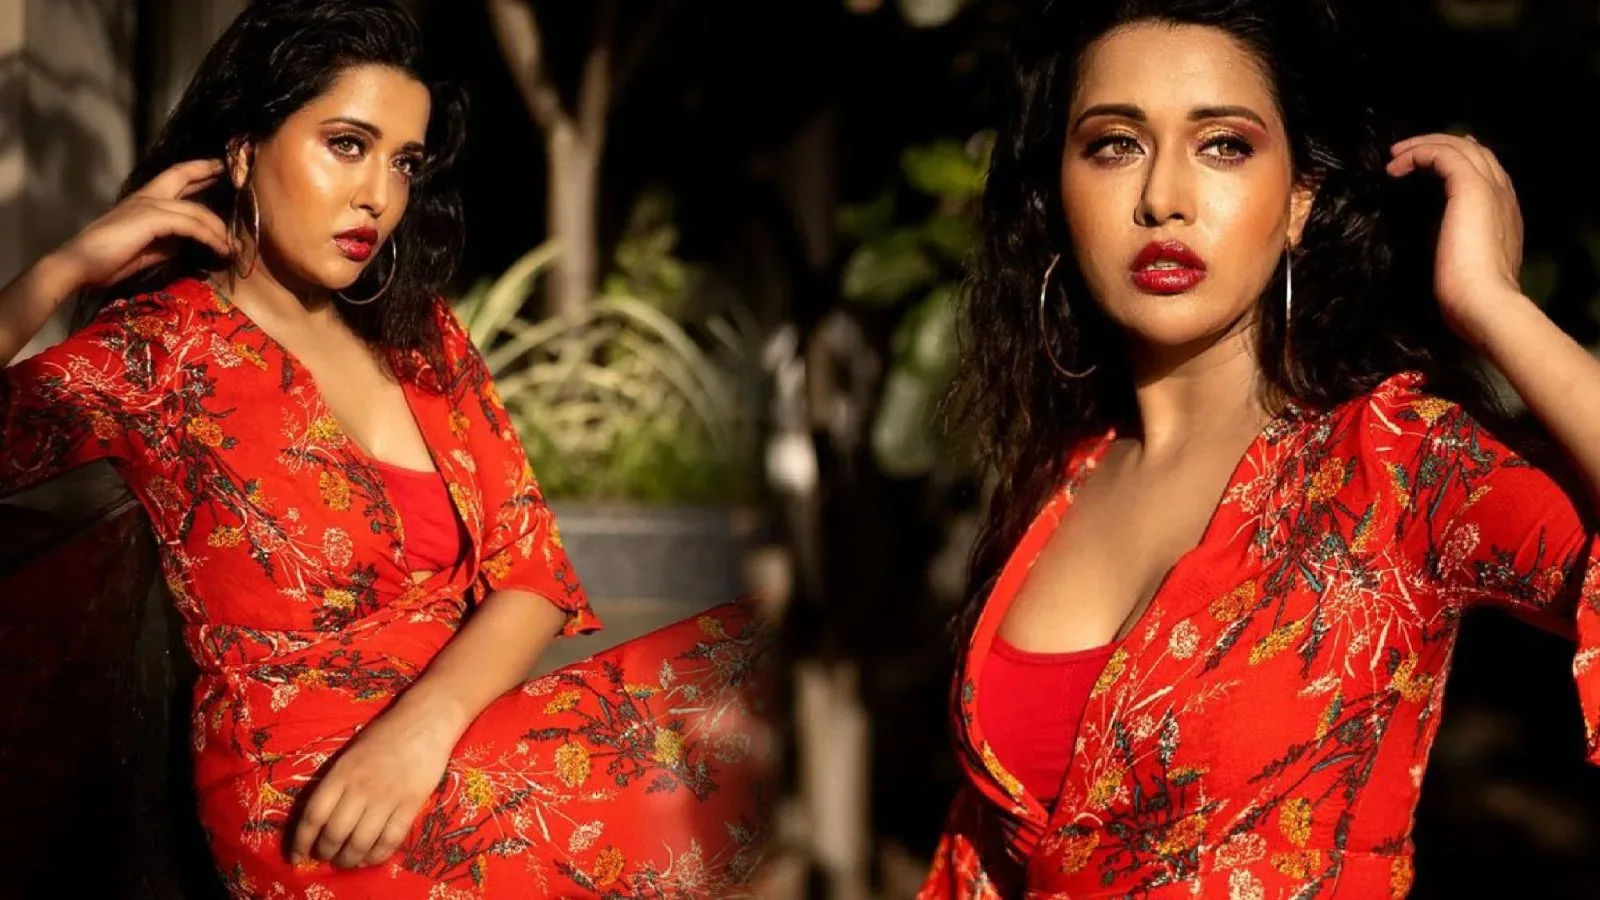 Actress Raiza Wilson looks like a glam doll in a red outfit